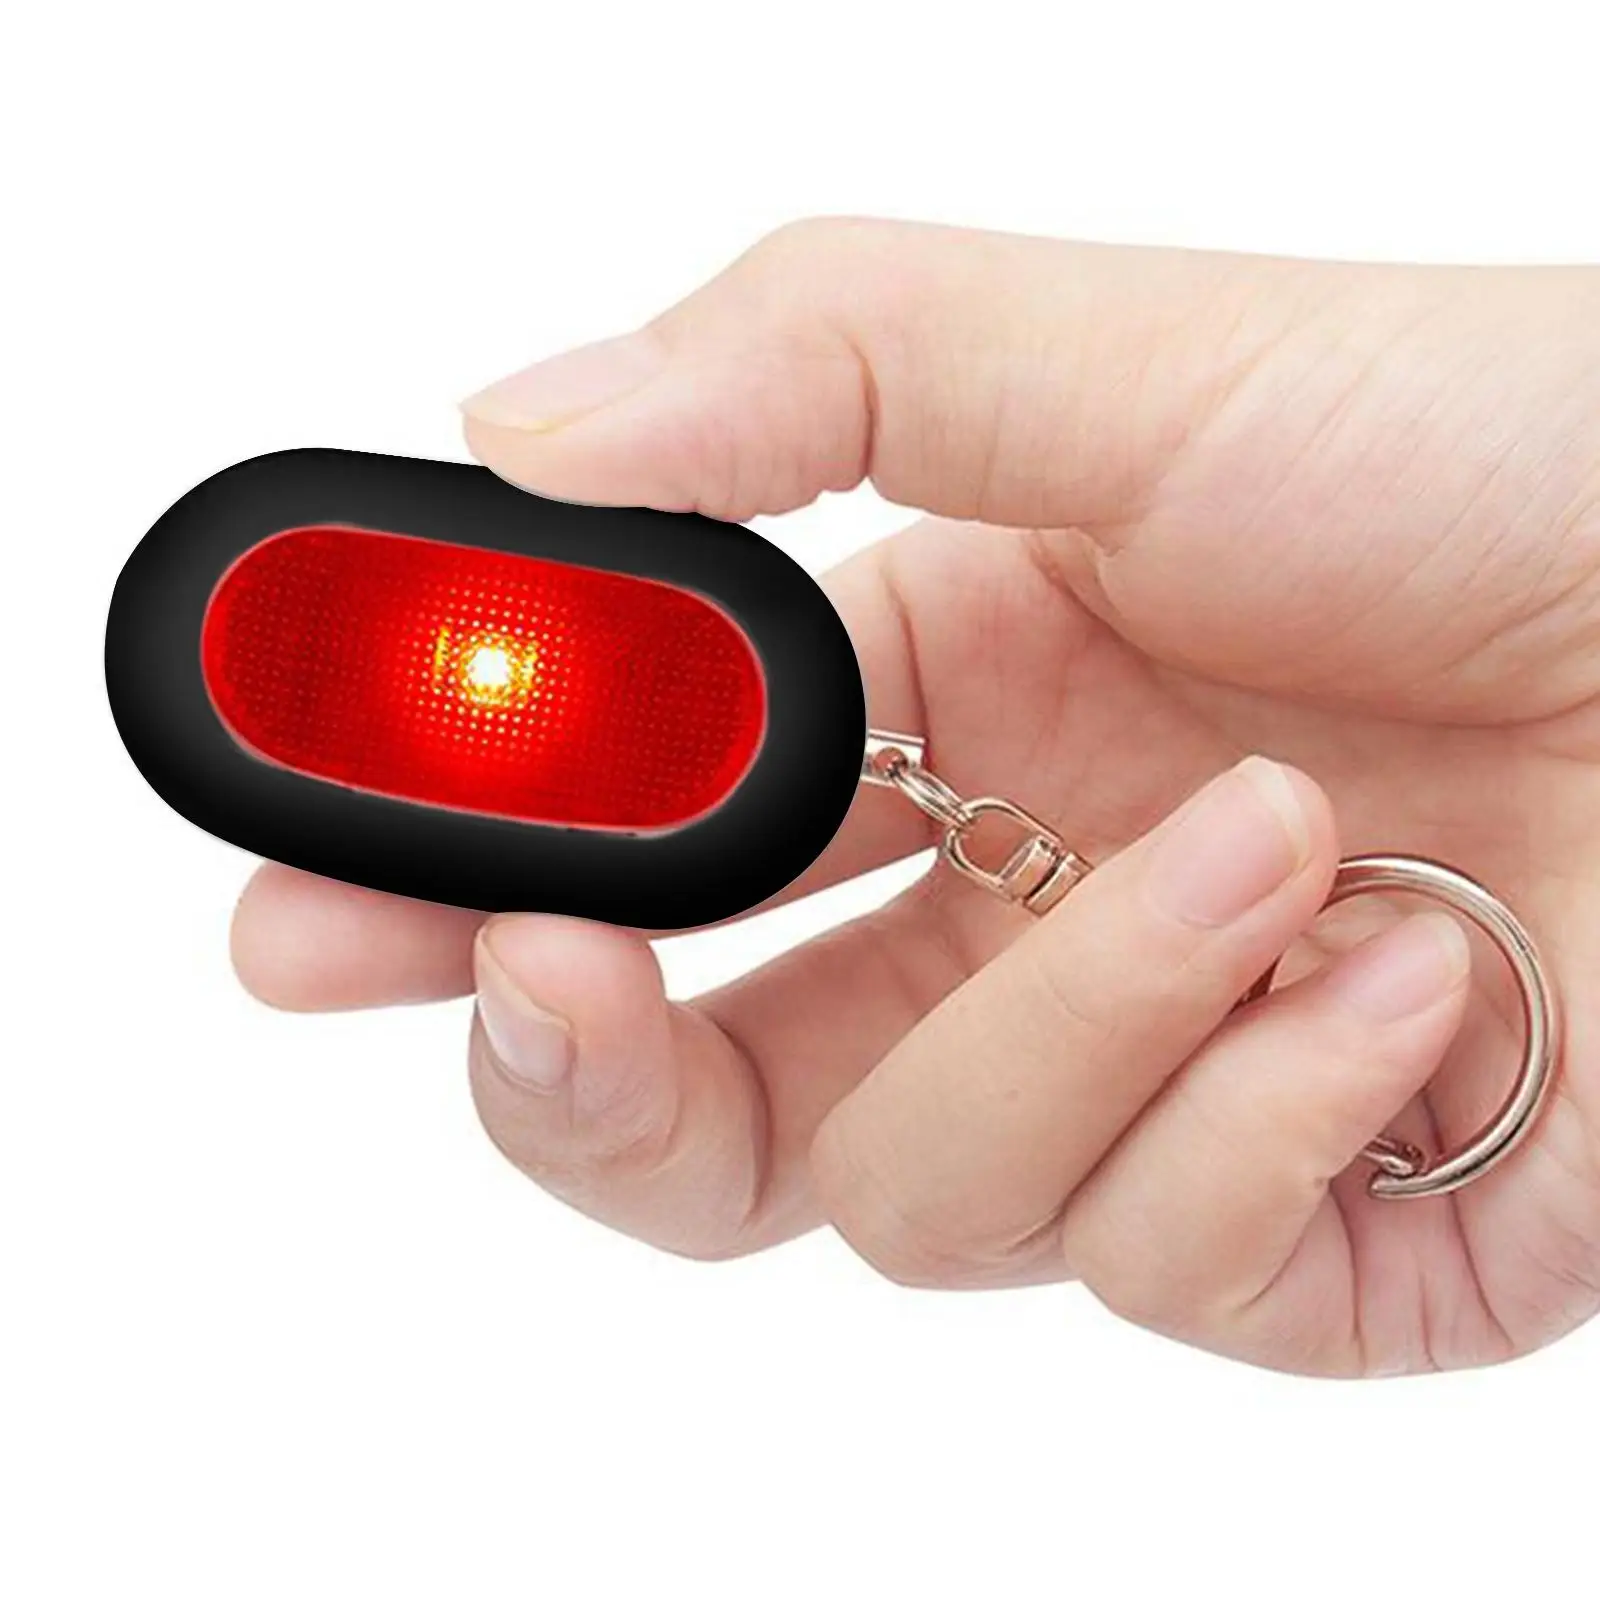 Personal Security Alarm 130dB with LED Light for Girls Women Lightweight Portable Keychain Loud Alarm Keychain Alarm with Hook